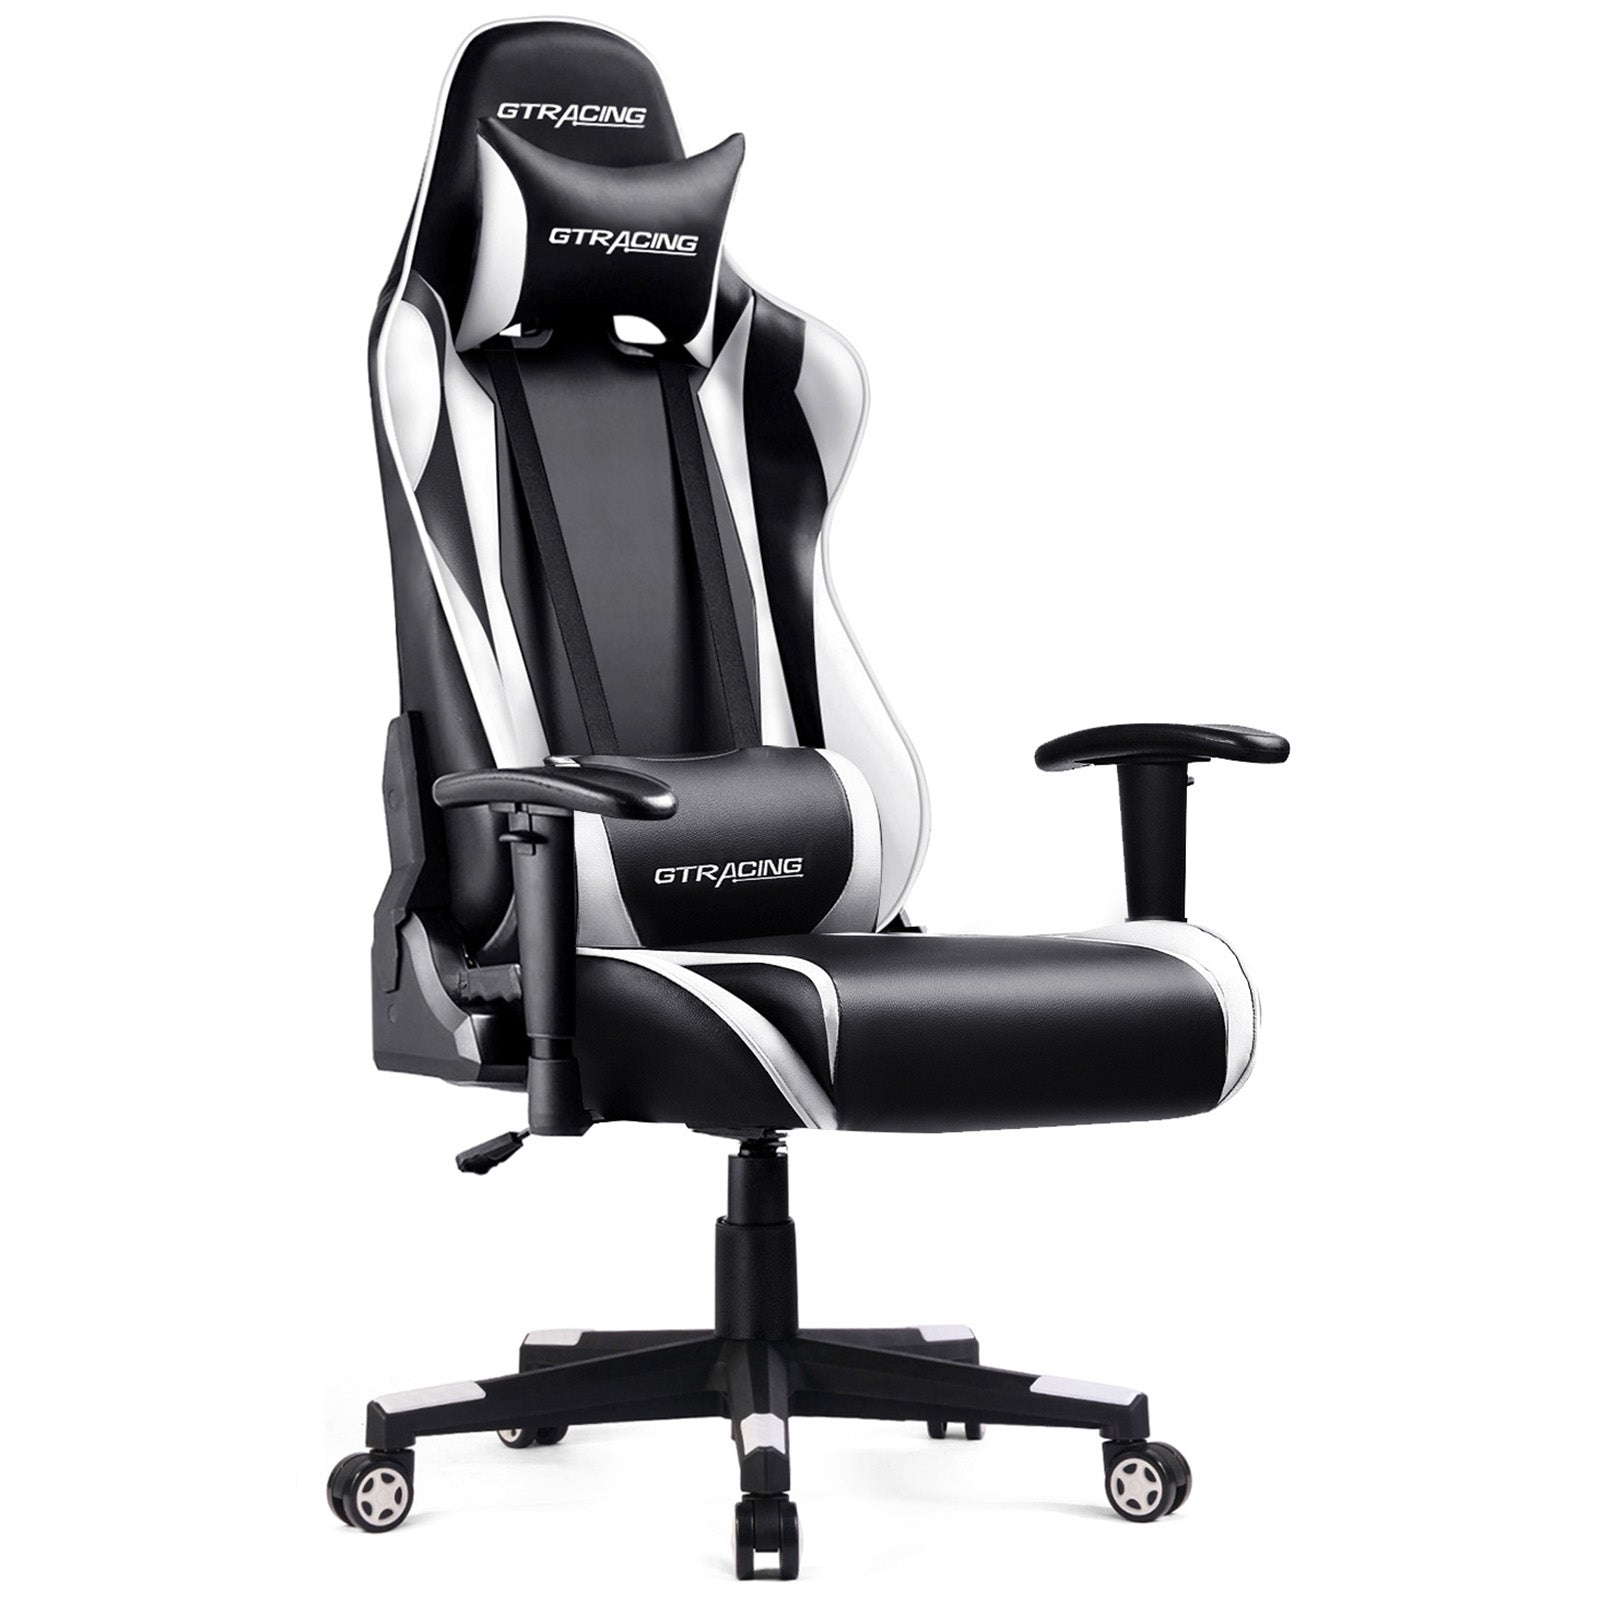 GT002-BLUE Reclining Gaming Chair | GTRACING – GTRACING（ジー